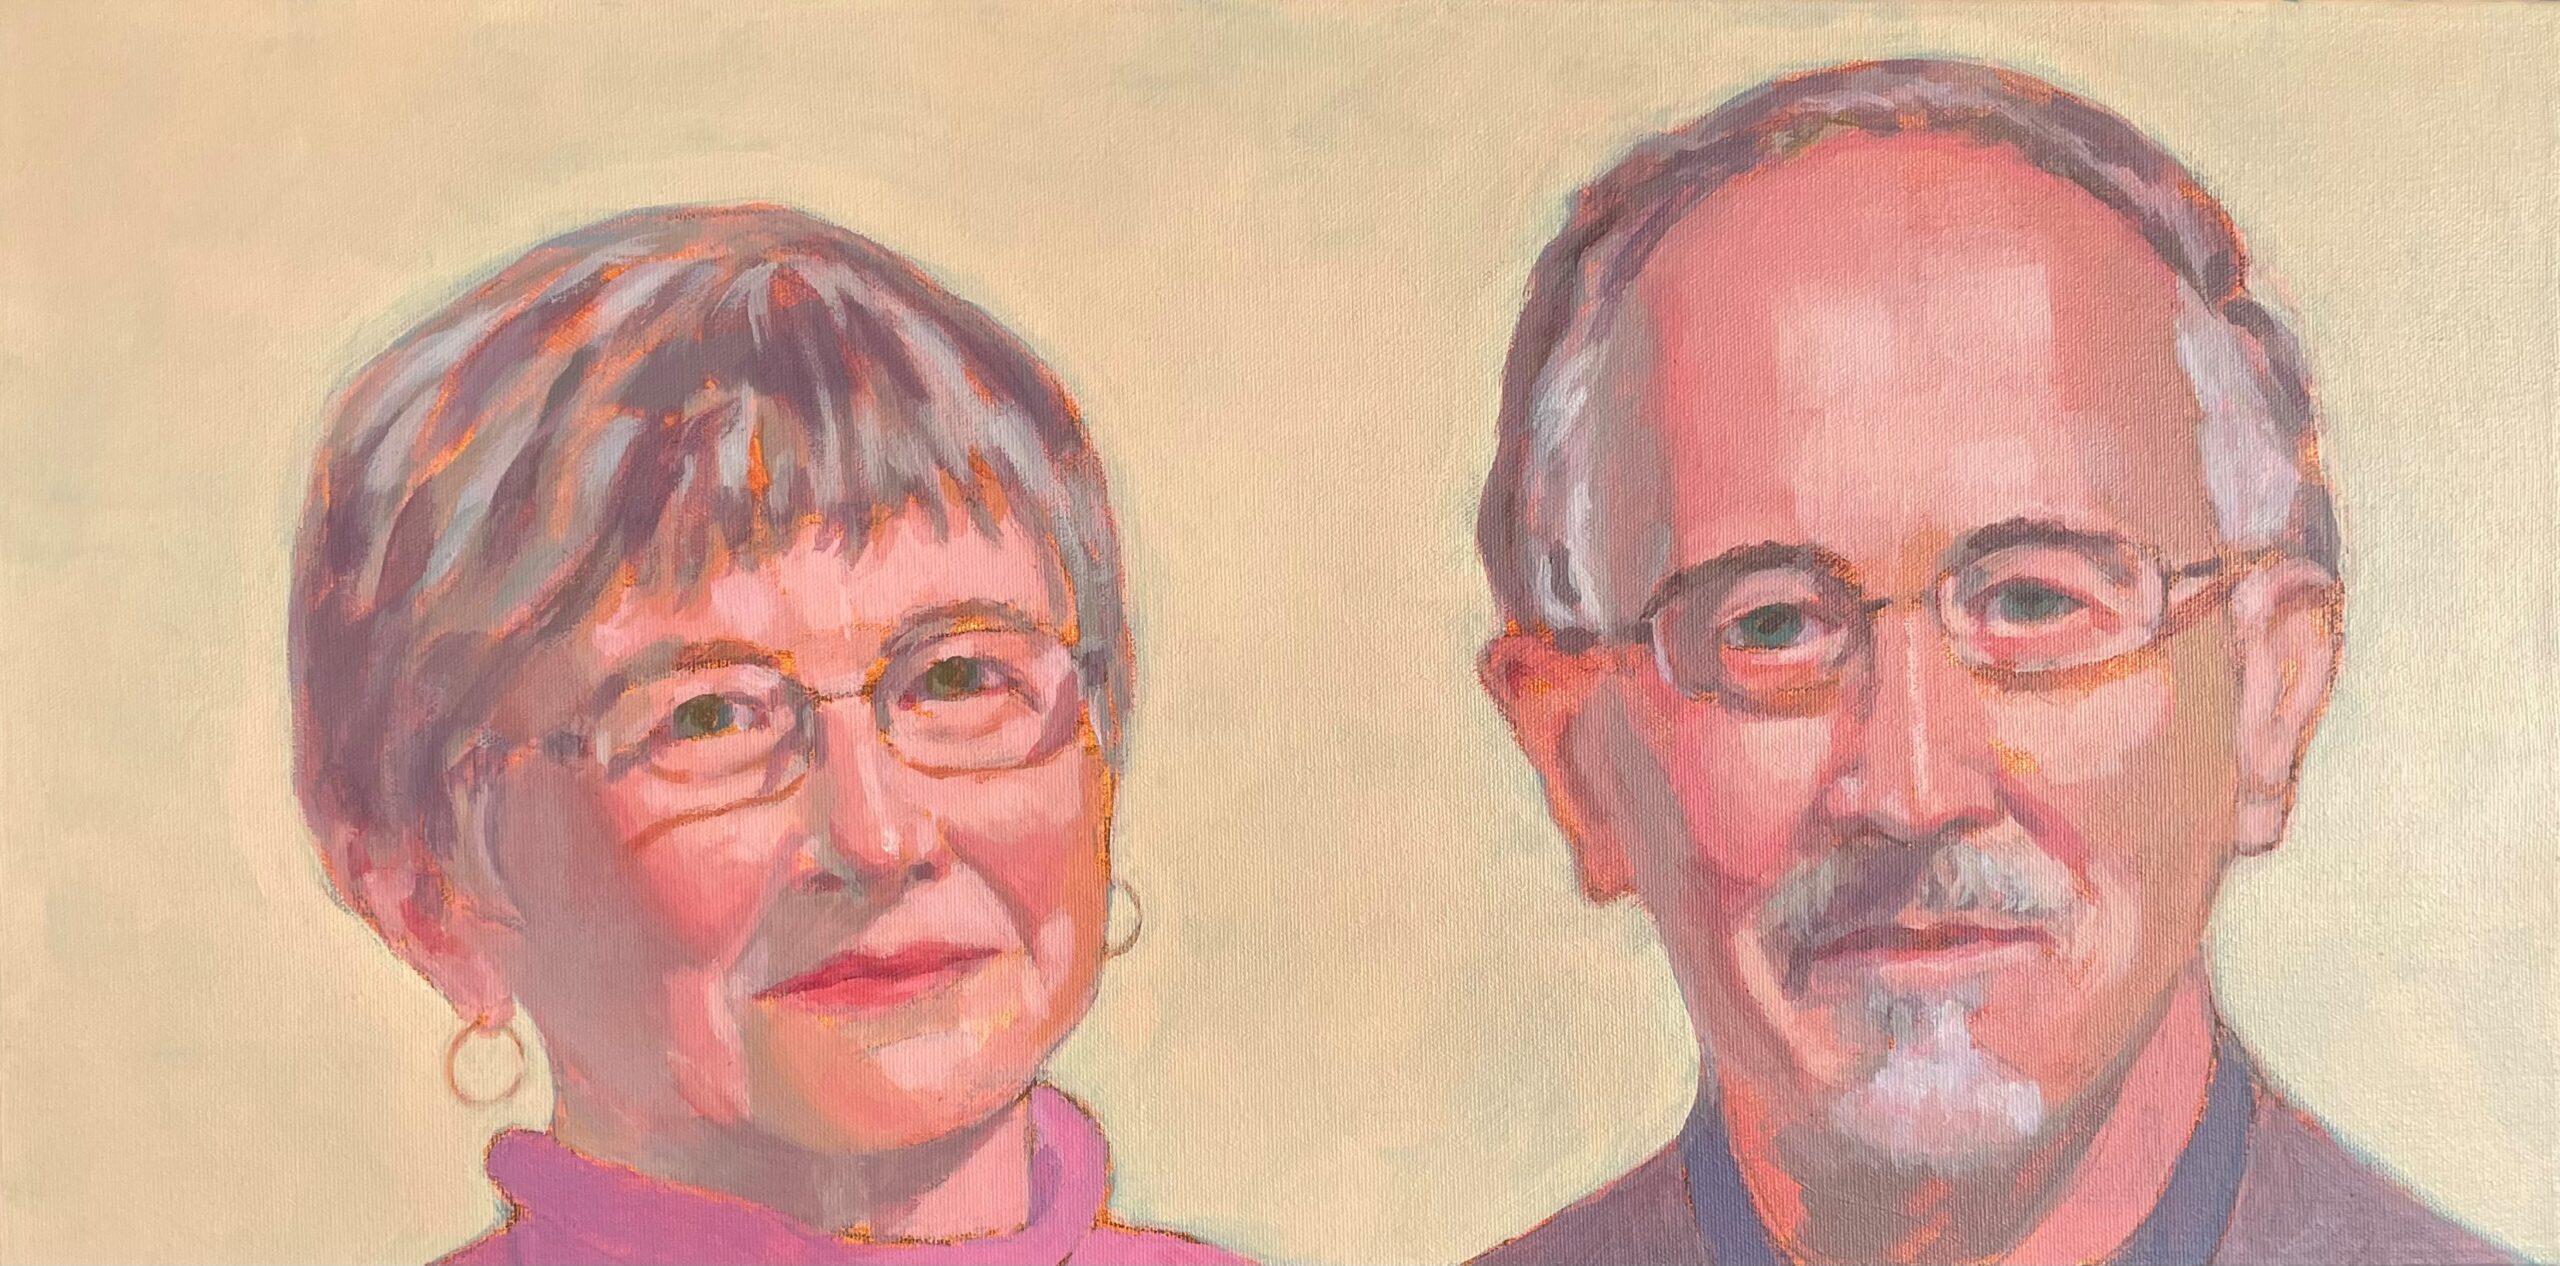 “From Despair to Hope”: Shelagh and David Williams